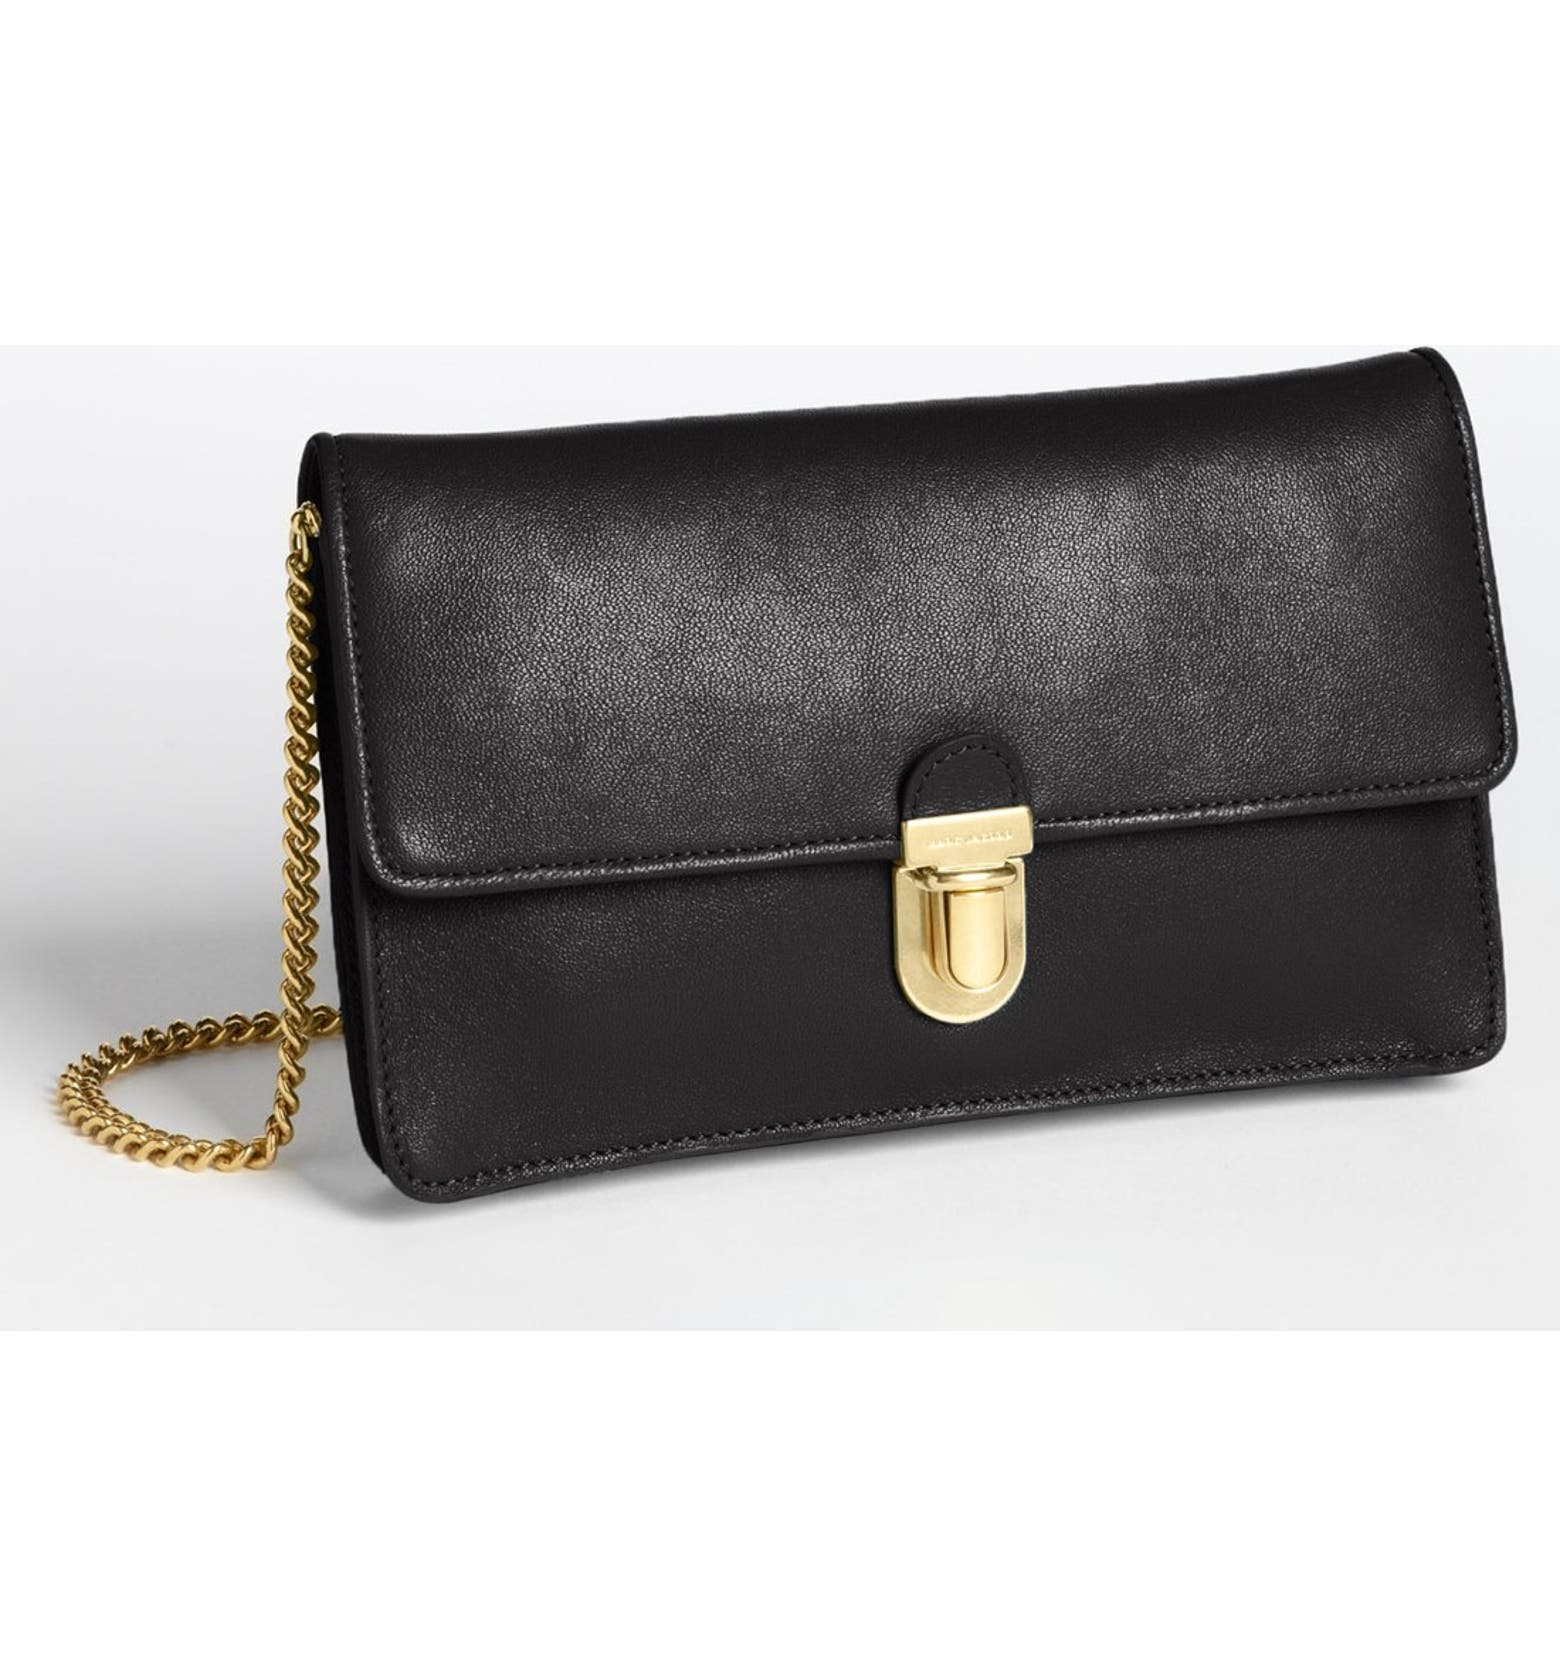 MARC JACOBS Leather Clutch | Nordstrom